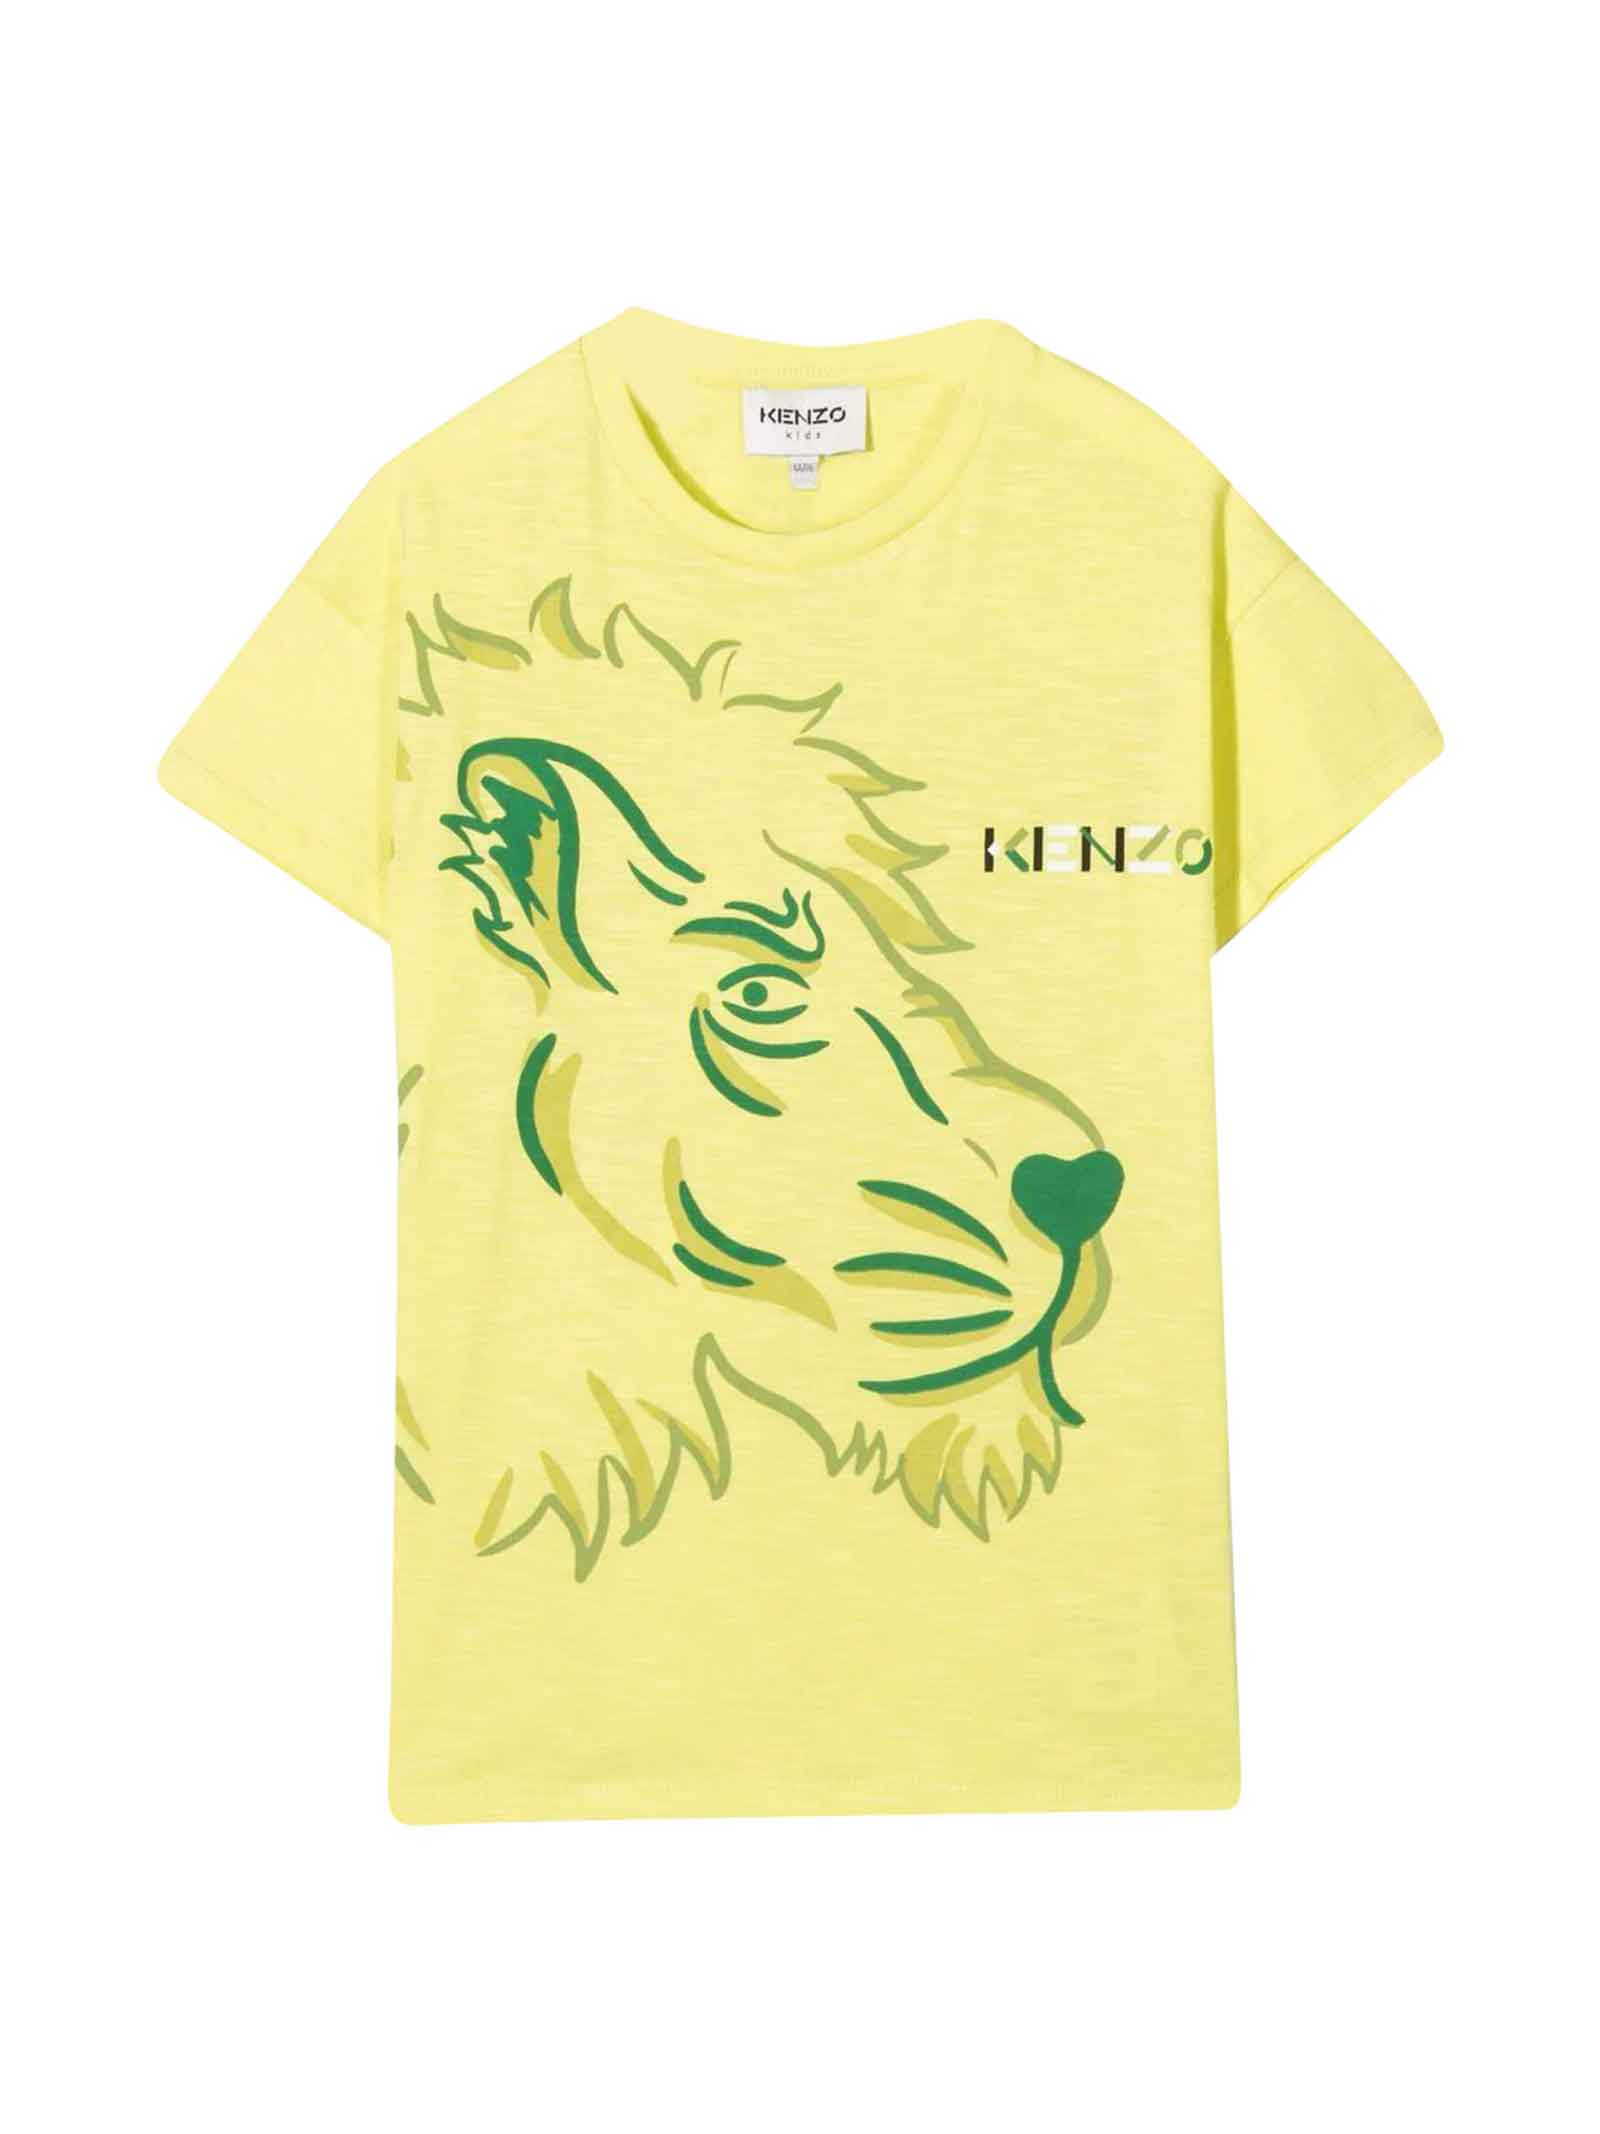 Kenzo Kids Yellow Boy T-shirt With Green Tiger Print, Logo Printed On The Side, Crew Neck And Short Sleeves By.